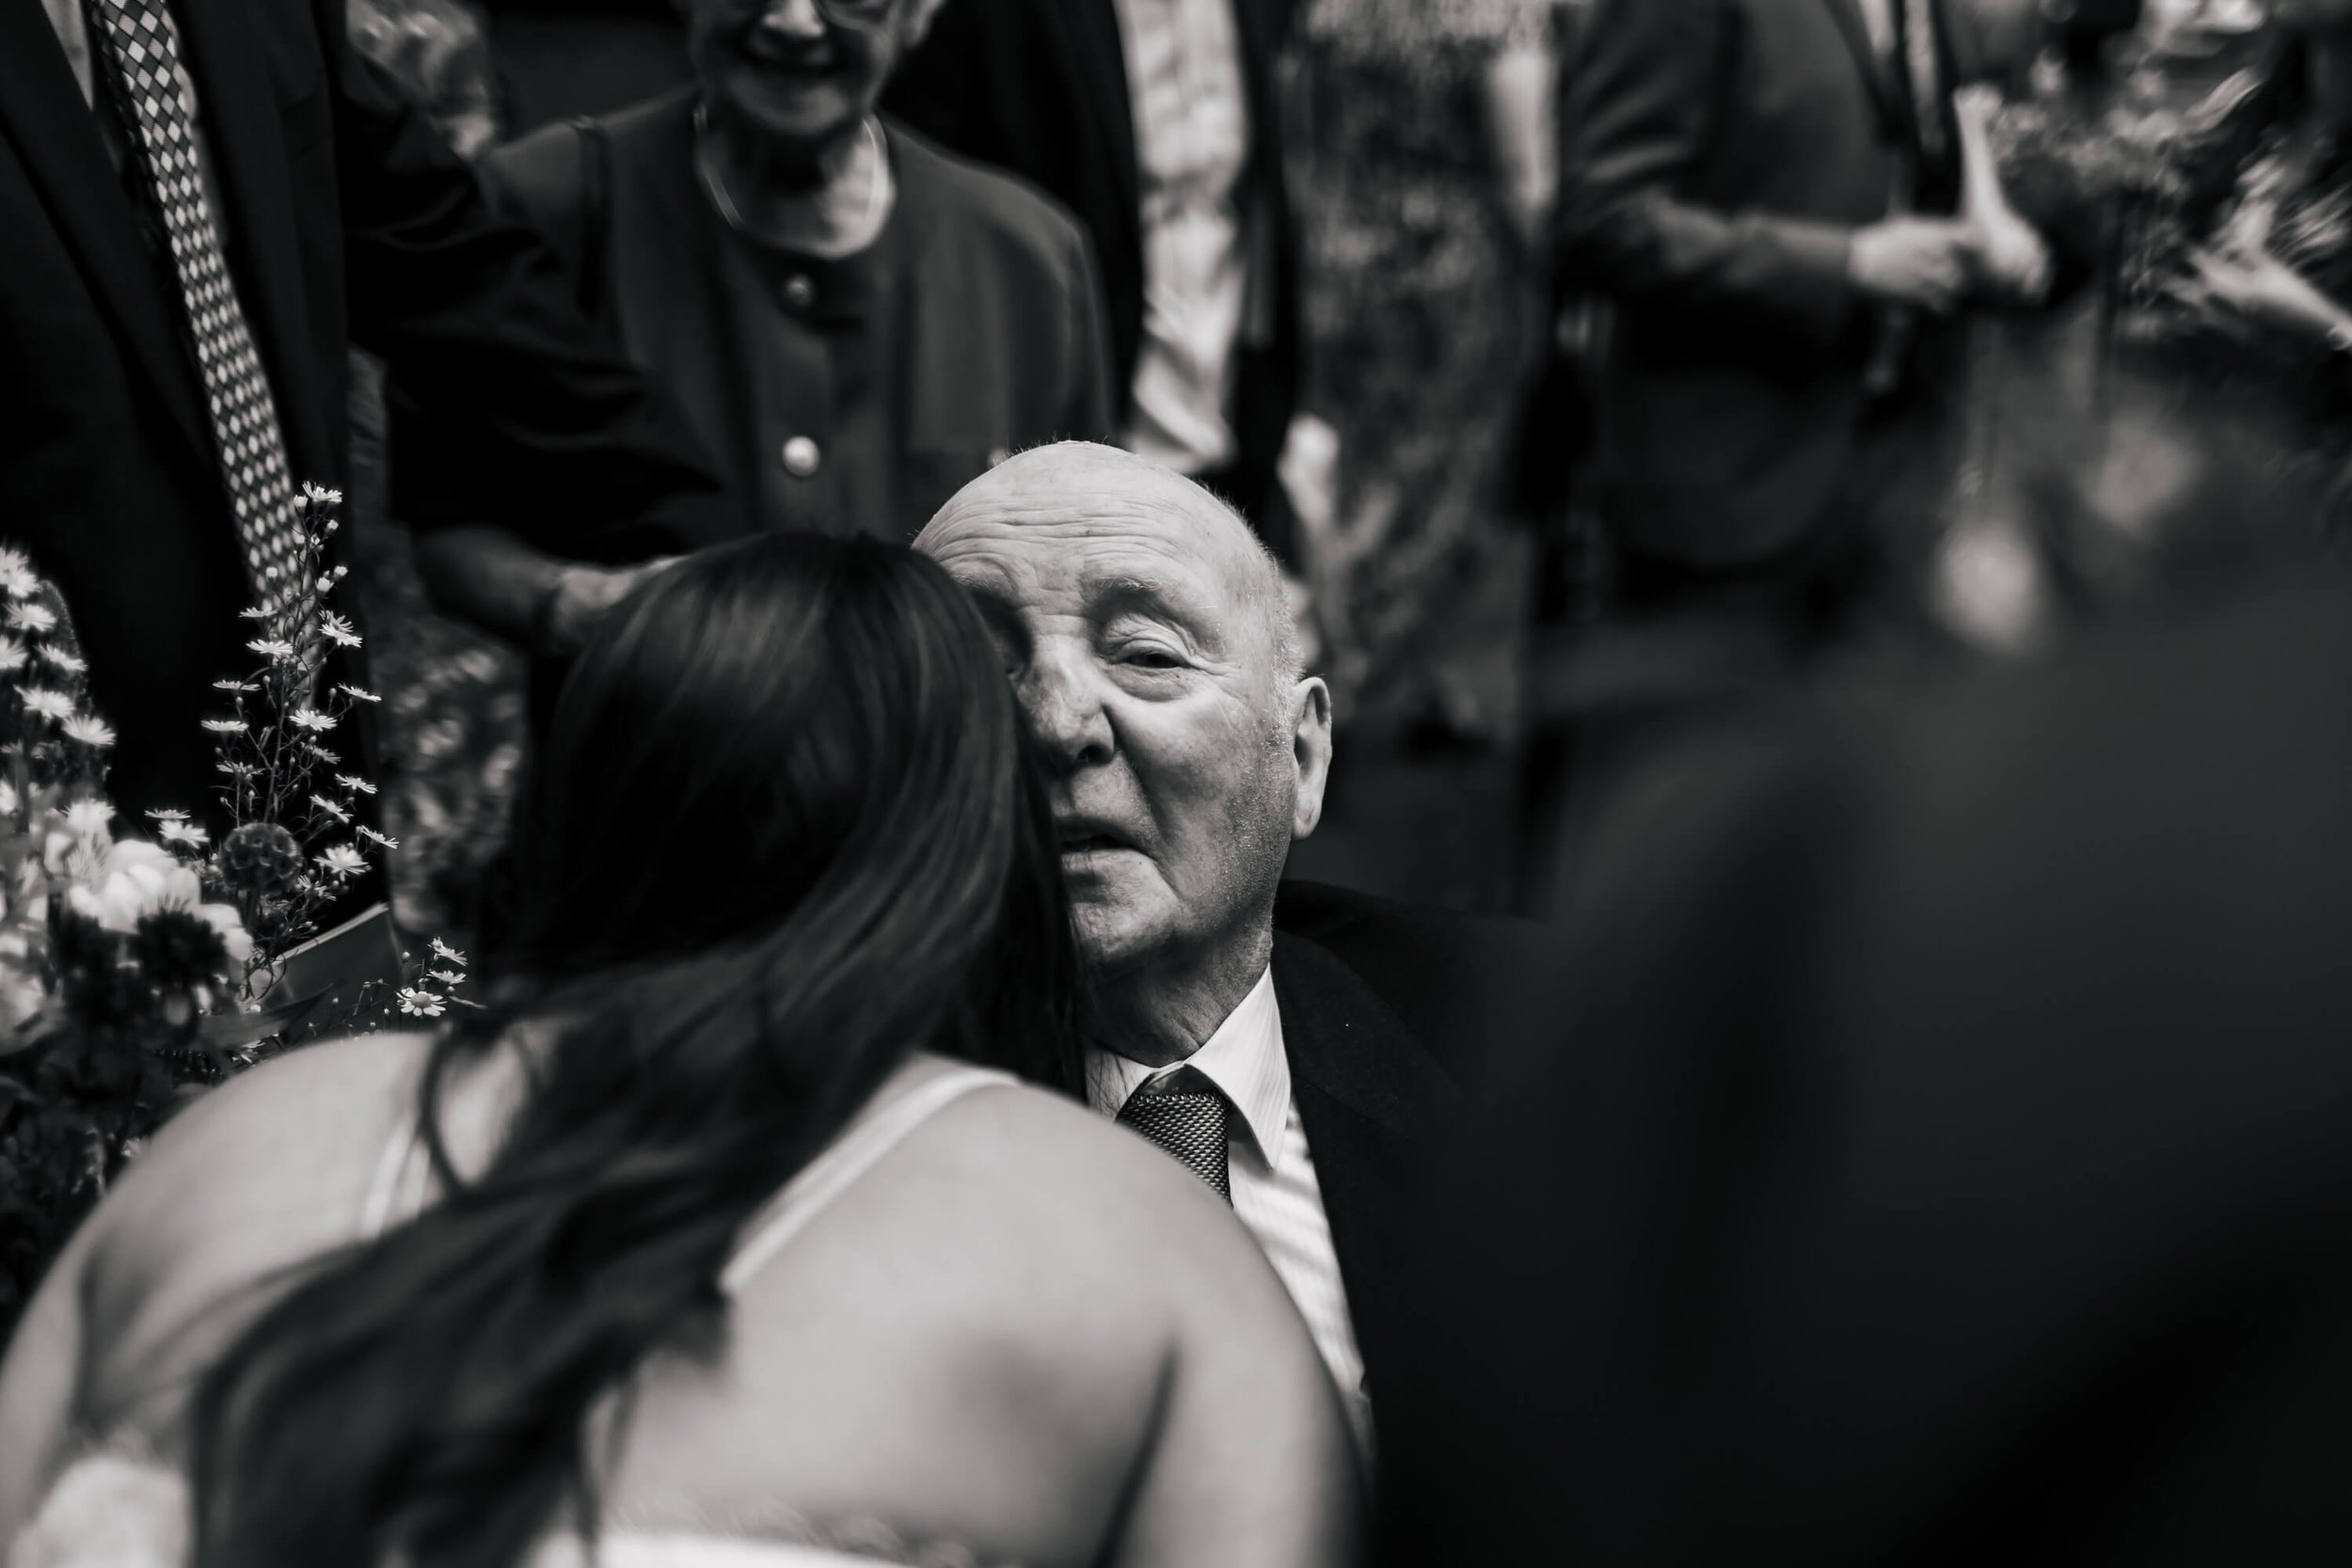 Bride and grandad hugging at the church after the wedding